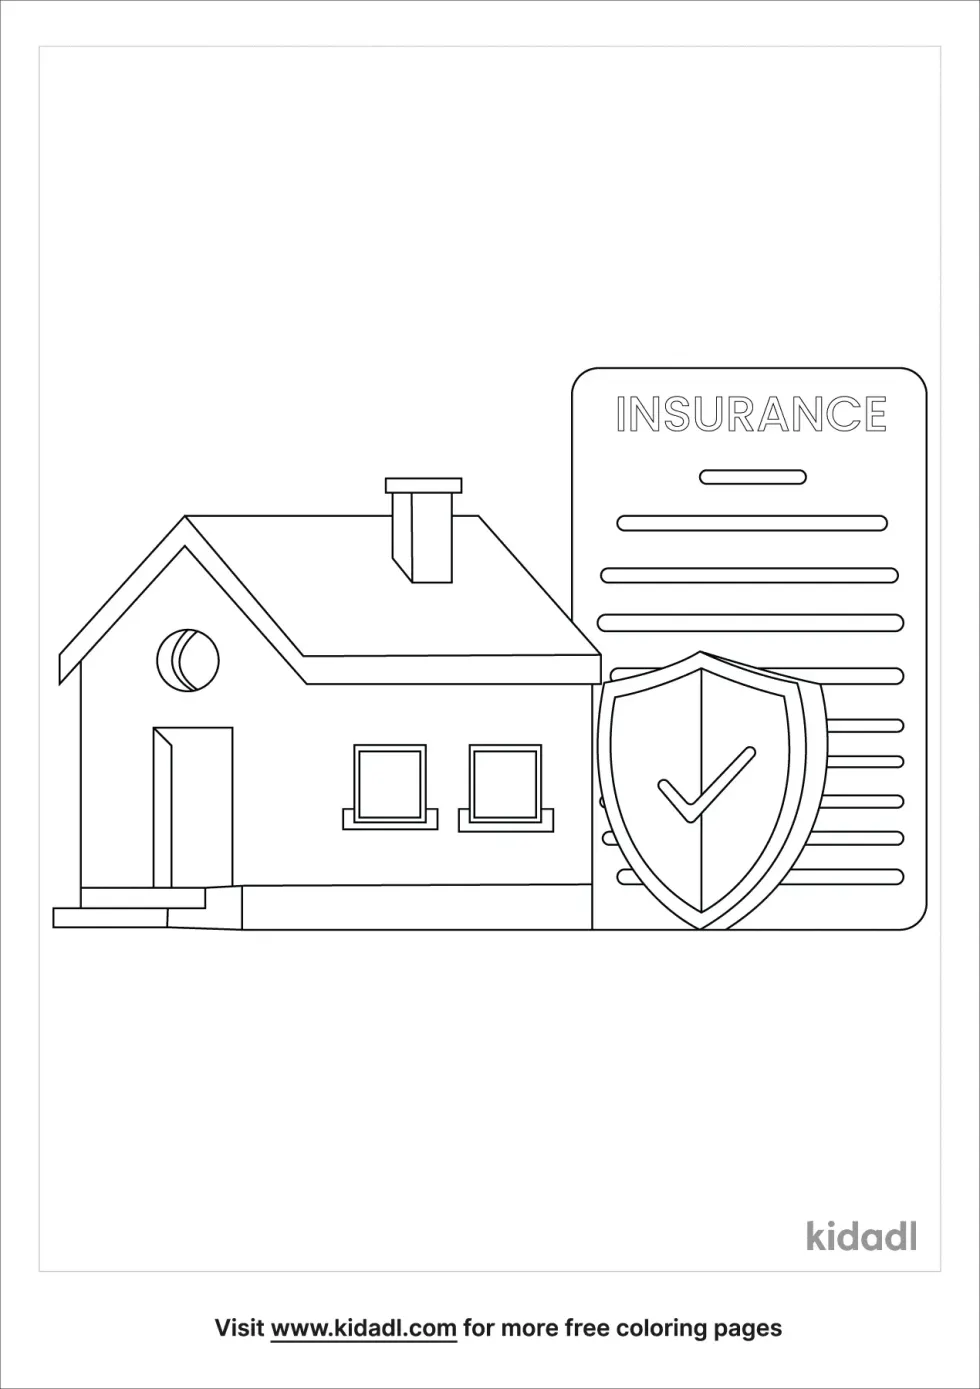 Insurance Coloring Page